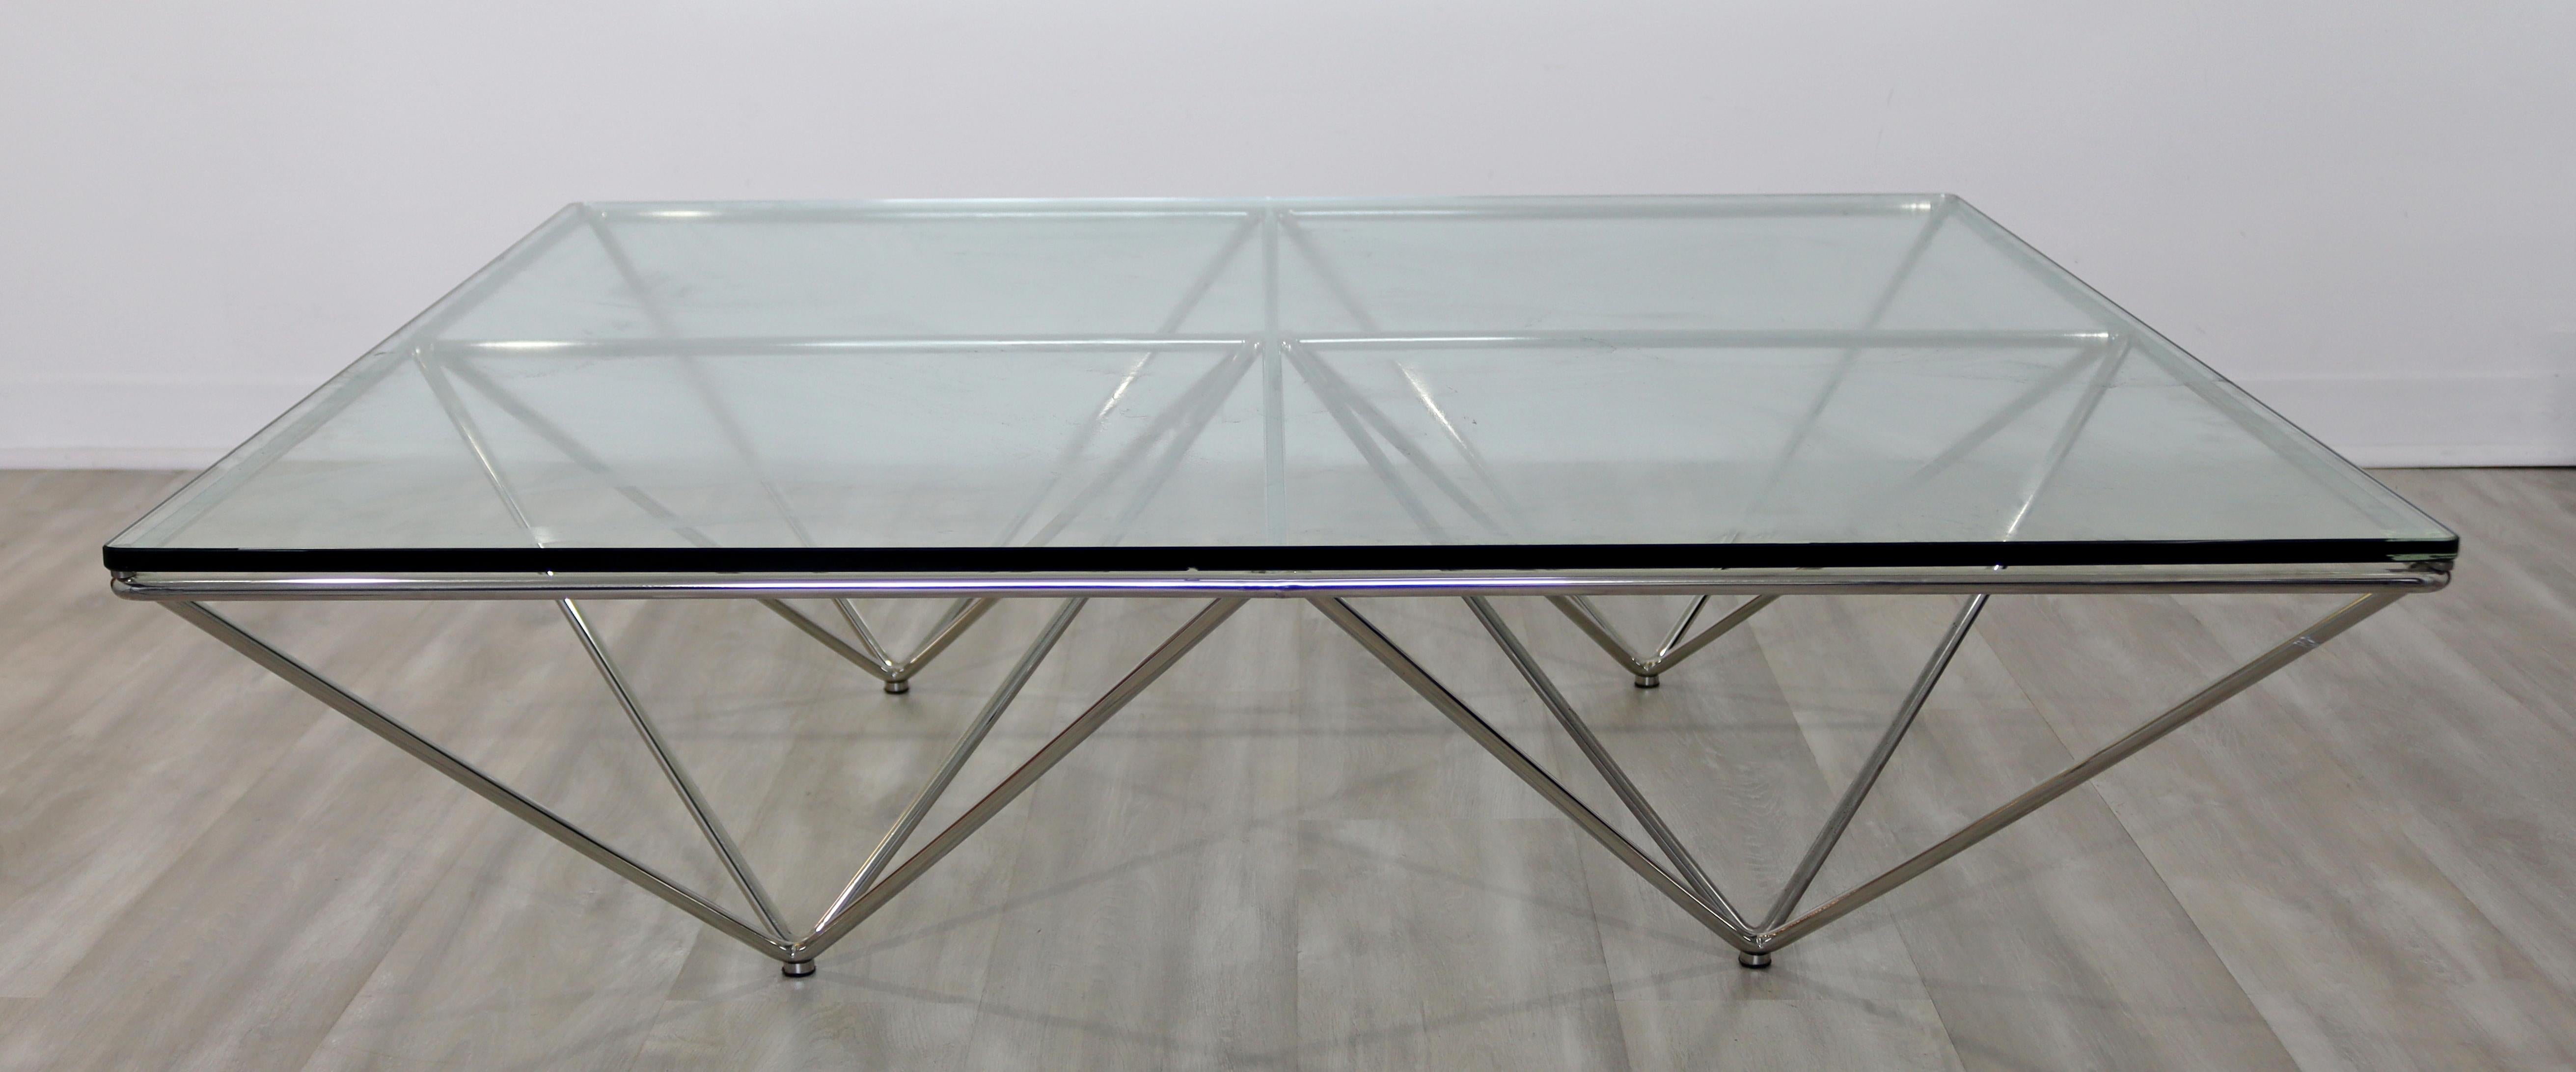 For your consideration is a phenomenal 'Alanda' coffee table, with a glass top on a geometric shaped chrome base, by Paola Piva for B&B Italia, circa the 1980s. In very good vintage condition, with a couple of chips in the glass. The dimensions are